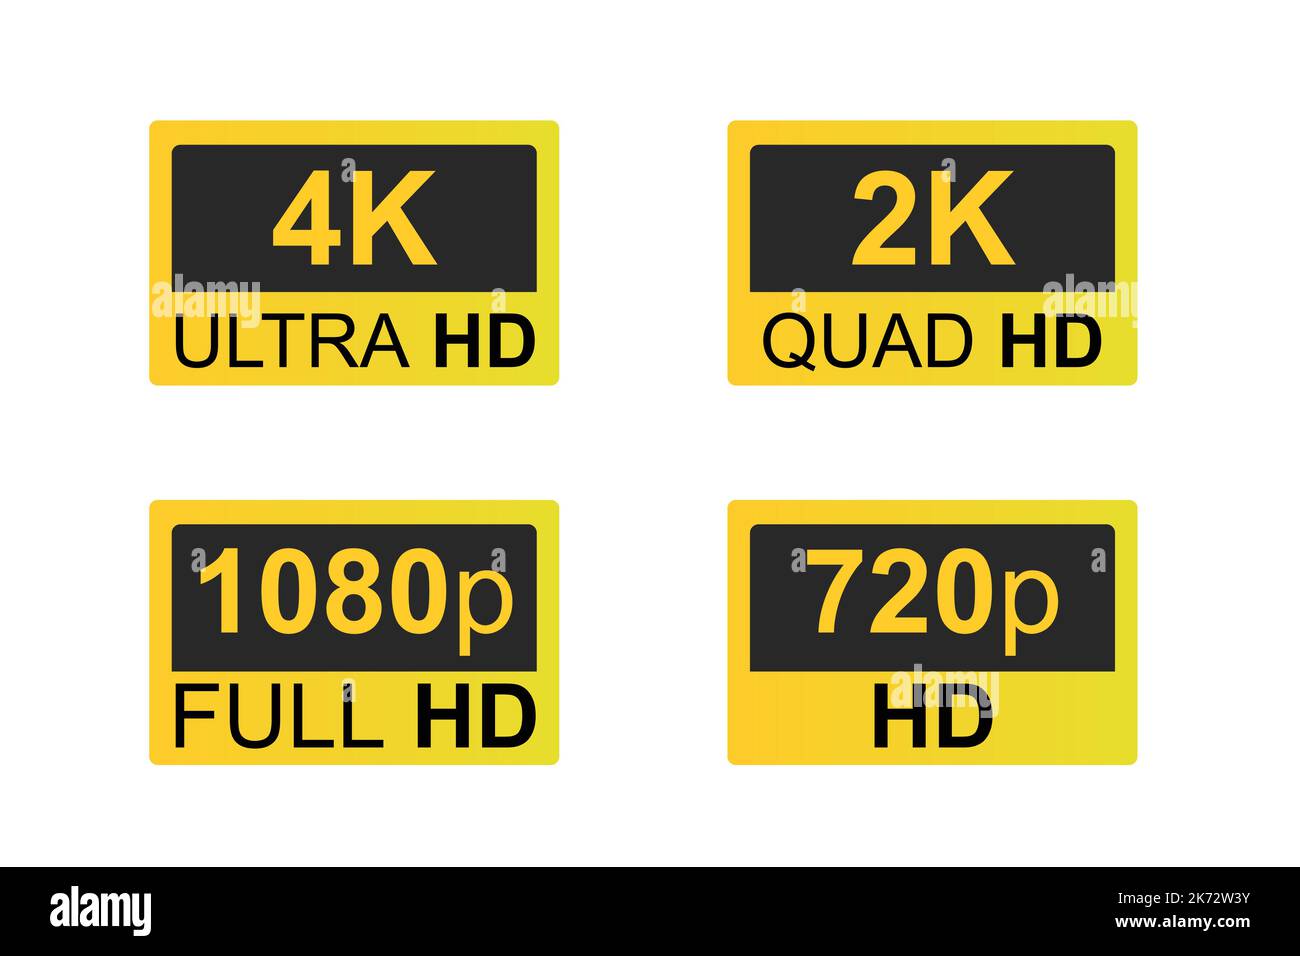 Display Resolution Gold Icons, 4k ultra HD resolution, 2k Quad HD, Full HD 1080p, and HD 720p. Stock Vector